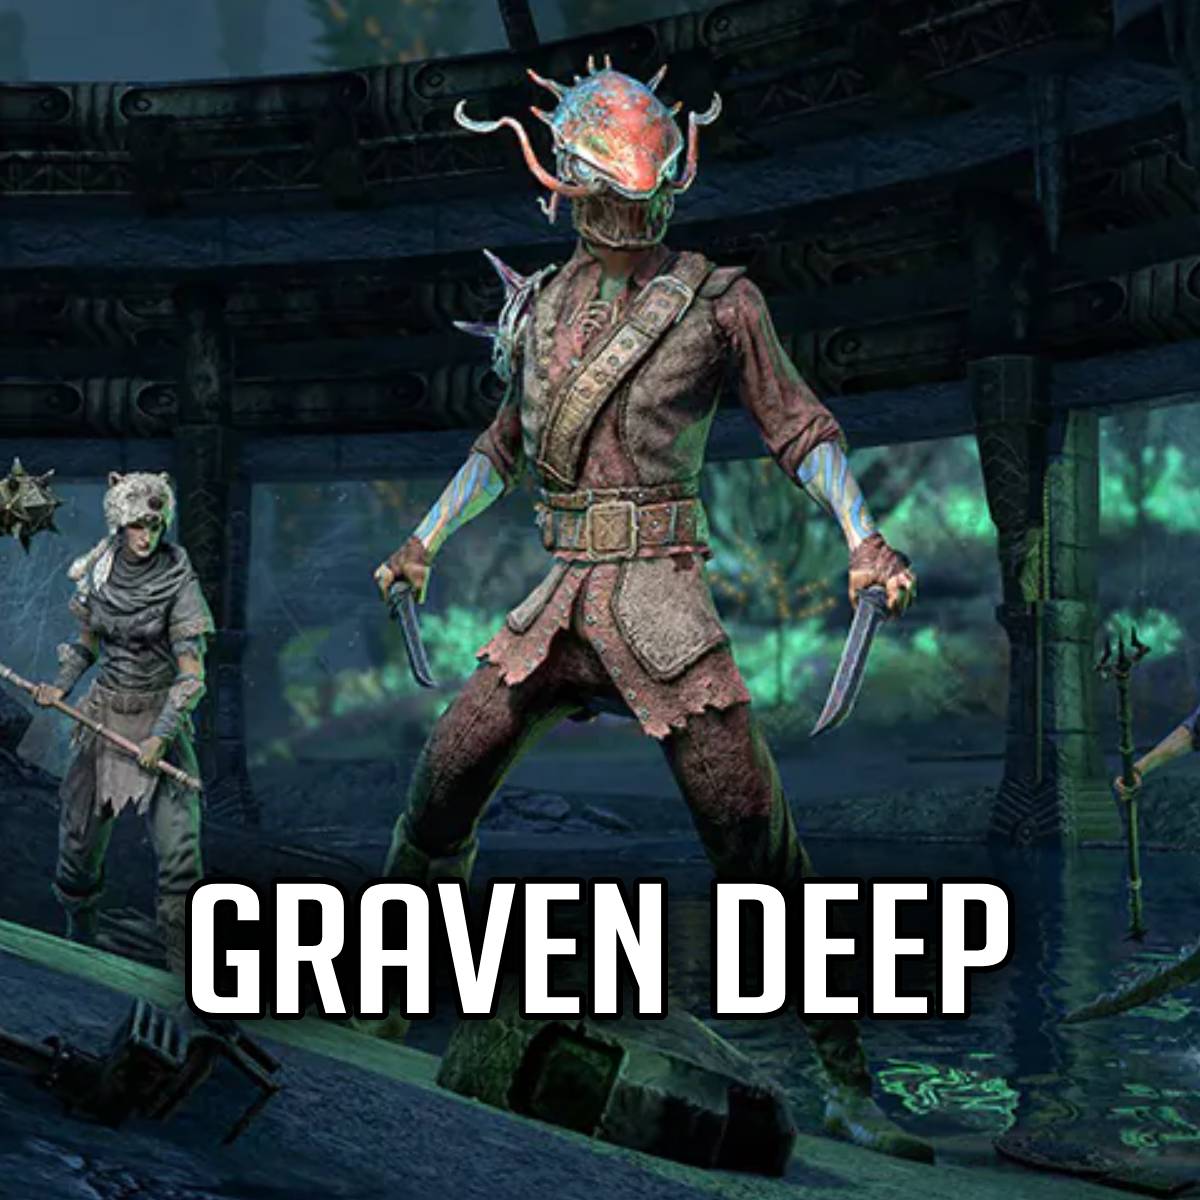 Graven Deep Dungeon Guide for ESO - AlcastHQ